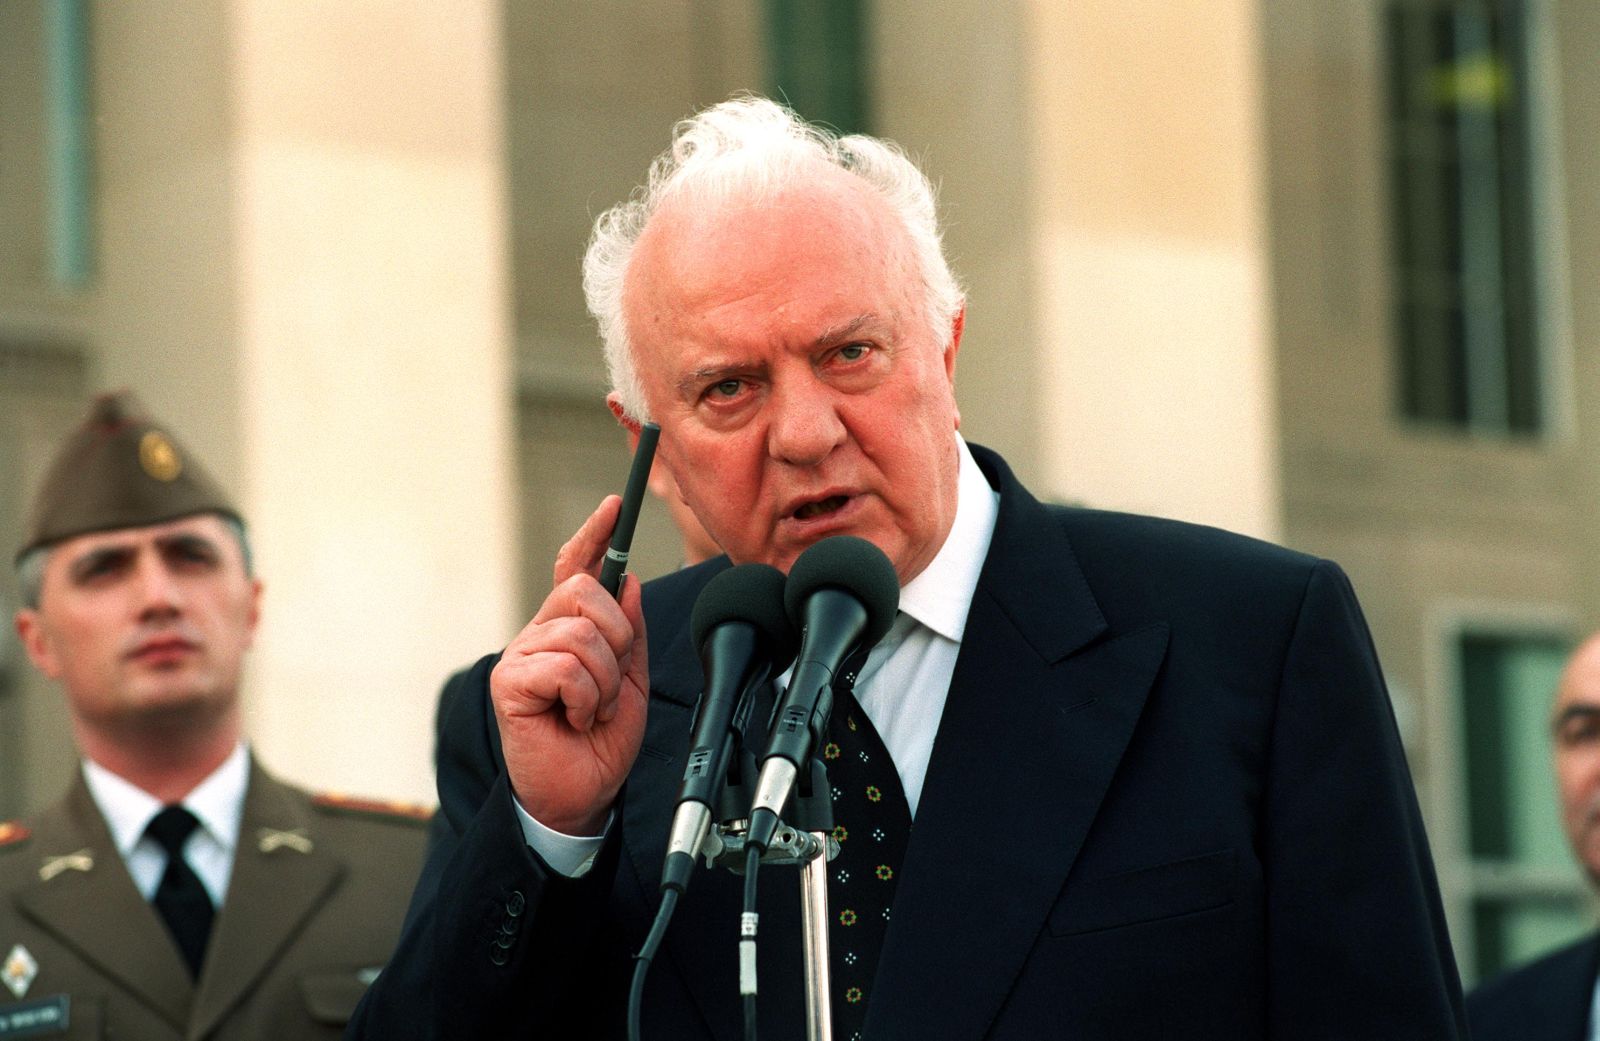 011005-D-2987S-066
Georgian President Eduard Shevardnadze makes a point during a joint press availability with Deputy Secretary of Defense Paul Wolfowitz at the Pentagon on Oct. 5, 2001.  DoD photo by Helene C. Stikkel.  (Released)